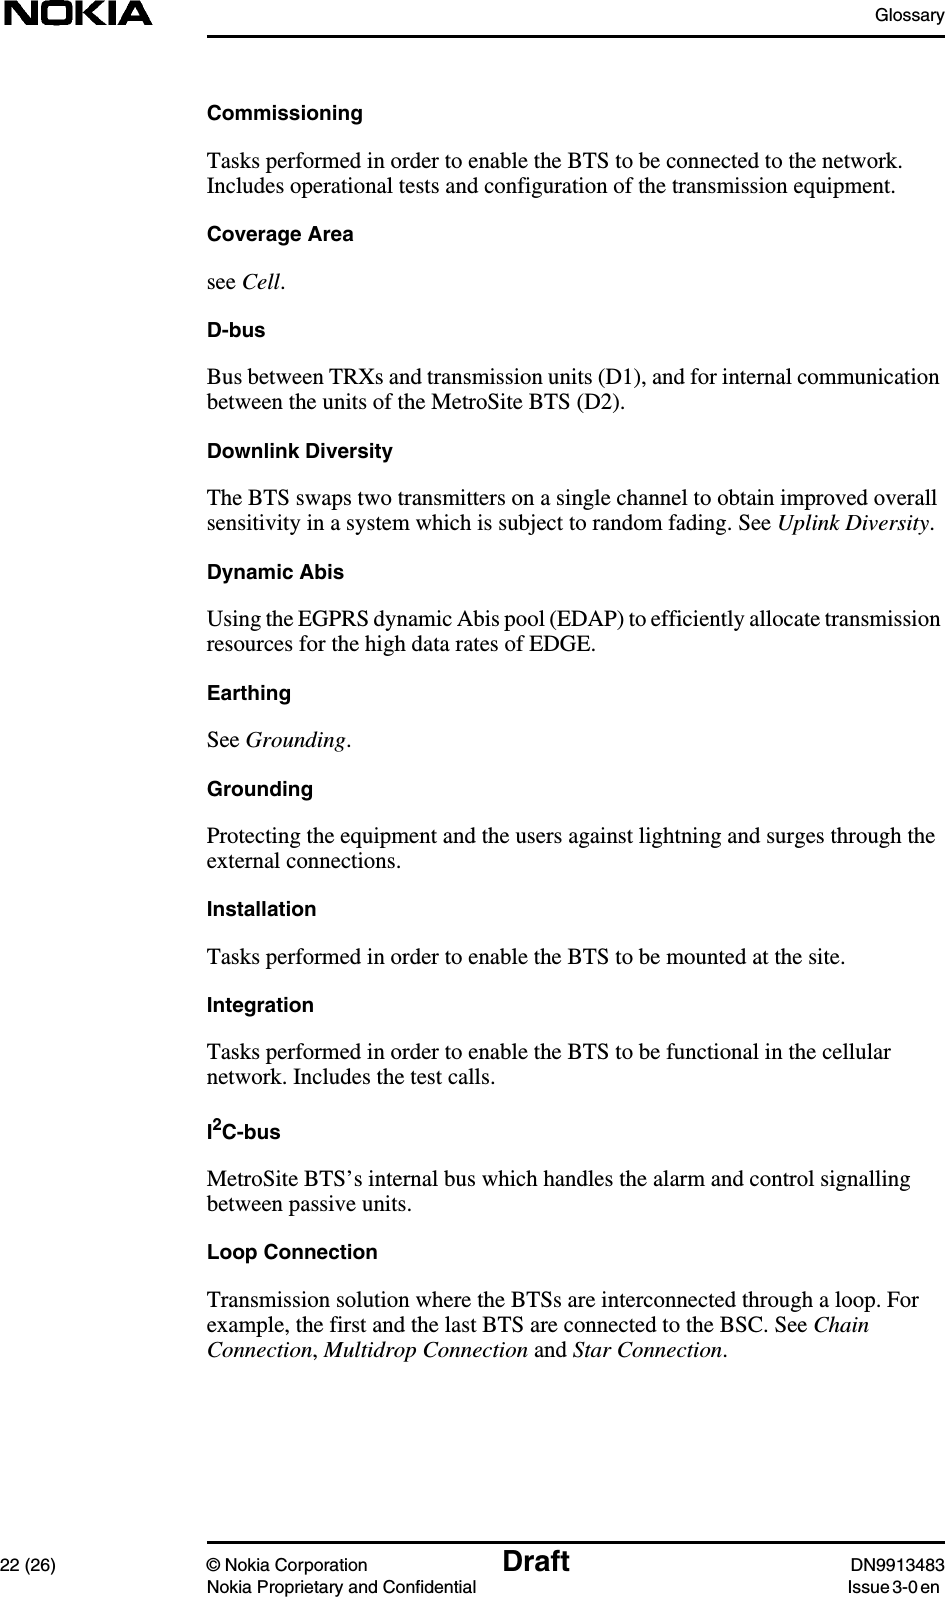 Glossary22 (26) © Nokia Corporation Draft DN9913483Nokia Proprietary and Confidential Issue 3-0 enCommissioningTasks performed in order to enable the BTS to be connected to the network.Includes operational tests and configuration of the transmission equipment.Coverage Areasee Cell.D-busBus between TRXs and transmission units (D1), and for internal communicationbetween the units of the MetroSite BTS (D2).Downlink DiversityThe BTS swaps two transmitters on a single channel to obtain improved overallsensitivity in a system which is subject to random fading. See Uplink Diversity.Dynamic AbisUsing the EGPRS dynamic Abis pool (EDAP) to efficiently allocate transmissionresources for the high data rates of EDGE.EarthingSee Grounding.GroundingProtecting the equipment and the users against lightning and surges through theexternal connections.InstallationTasks performed in order to enable the BTS to be mounted at the site.IntegrationTasks performed in order to enable the BTS to be functional in the cellularnetwork. Includes the test calls.I2C-busMetroSite BTS’s internal bus which handles the alarm and control signallingbetween passive units.Loop ConnectionTransmission solution where the BTSs are interconnected through a loop. Forexample, the first and the last BTS are connected to the BSC. See ChainConnection,Multidrop Connection and Star Connection.